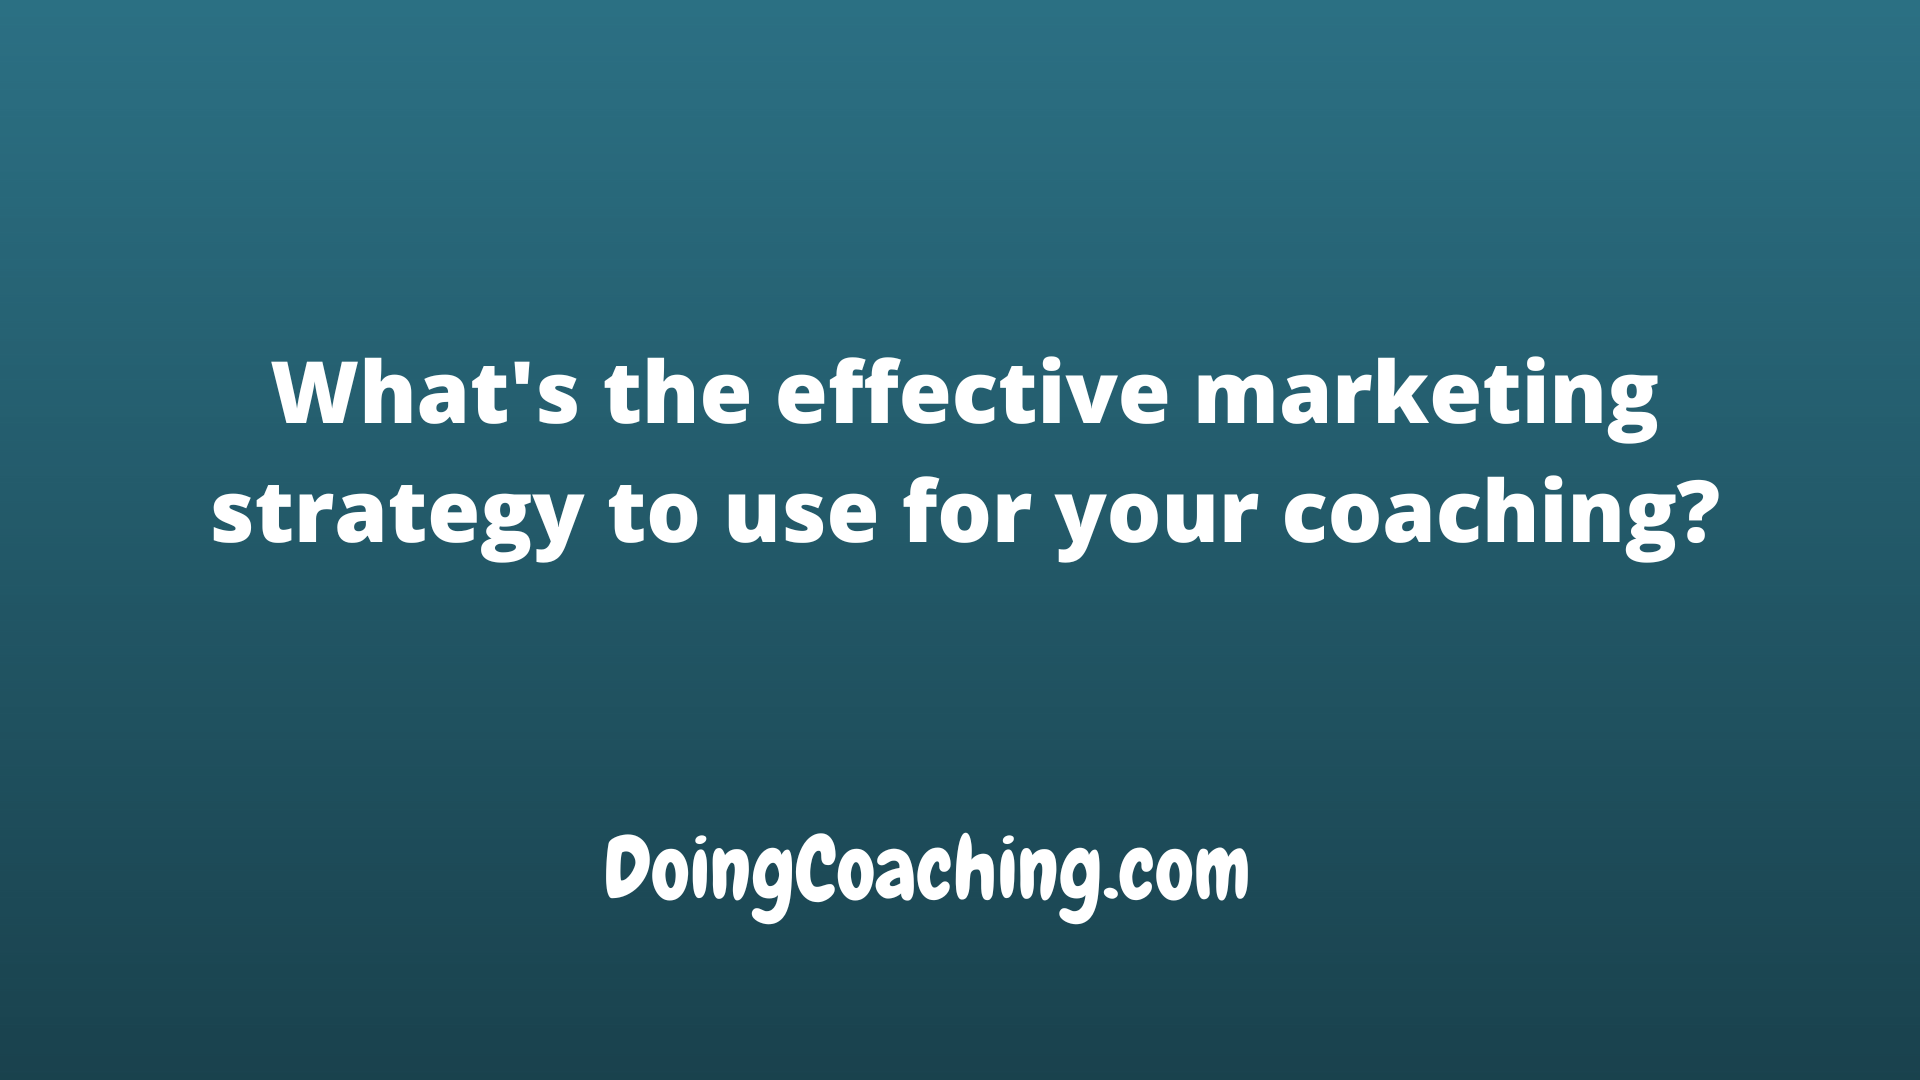 the effective marketing strategy to use for your coaching pic